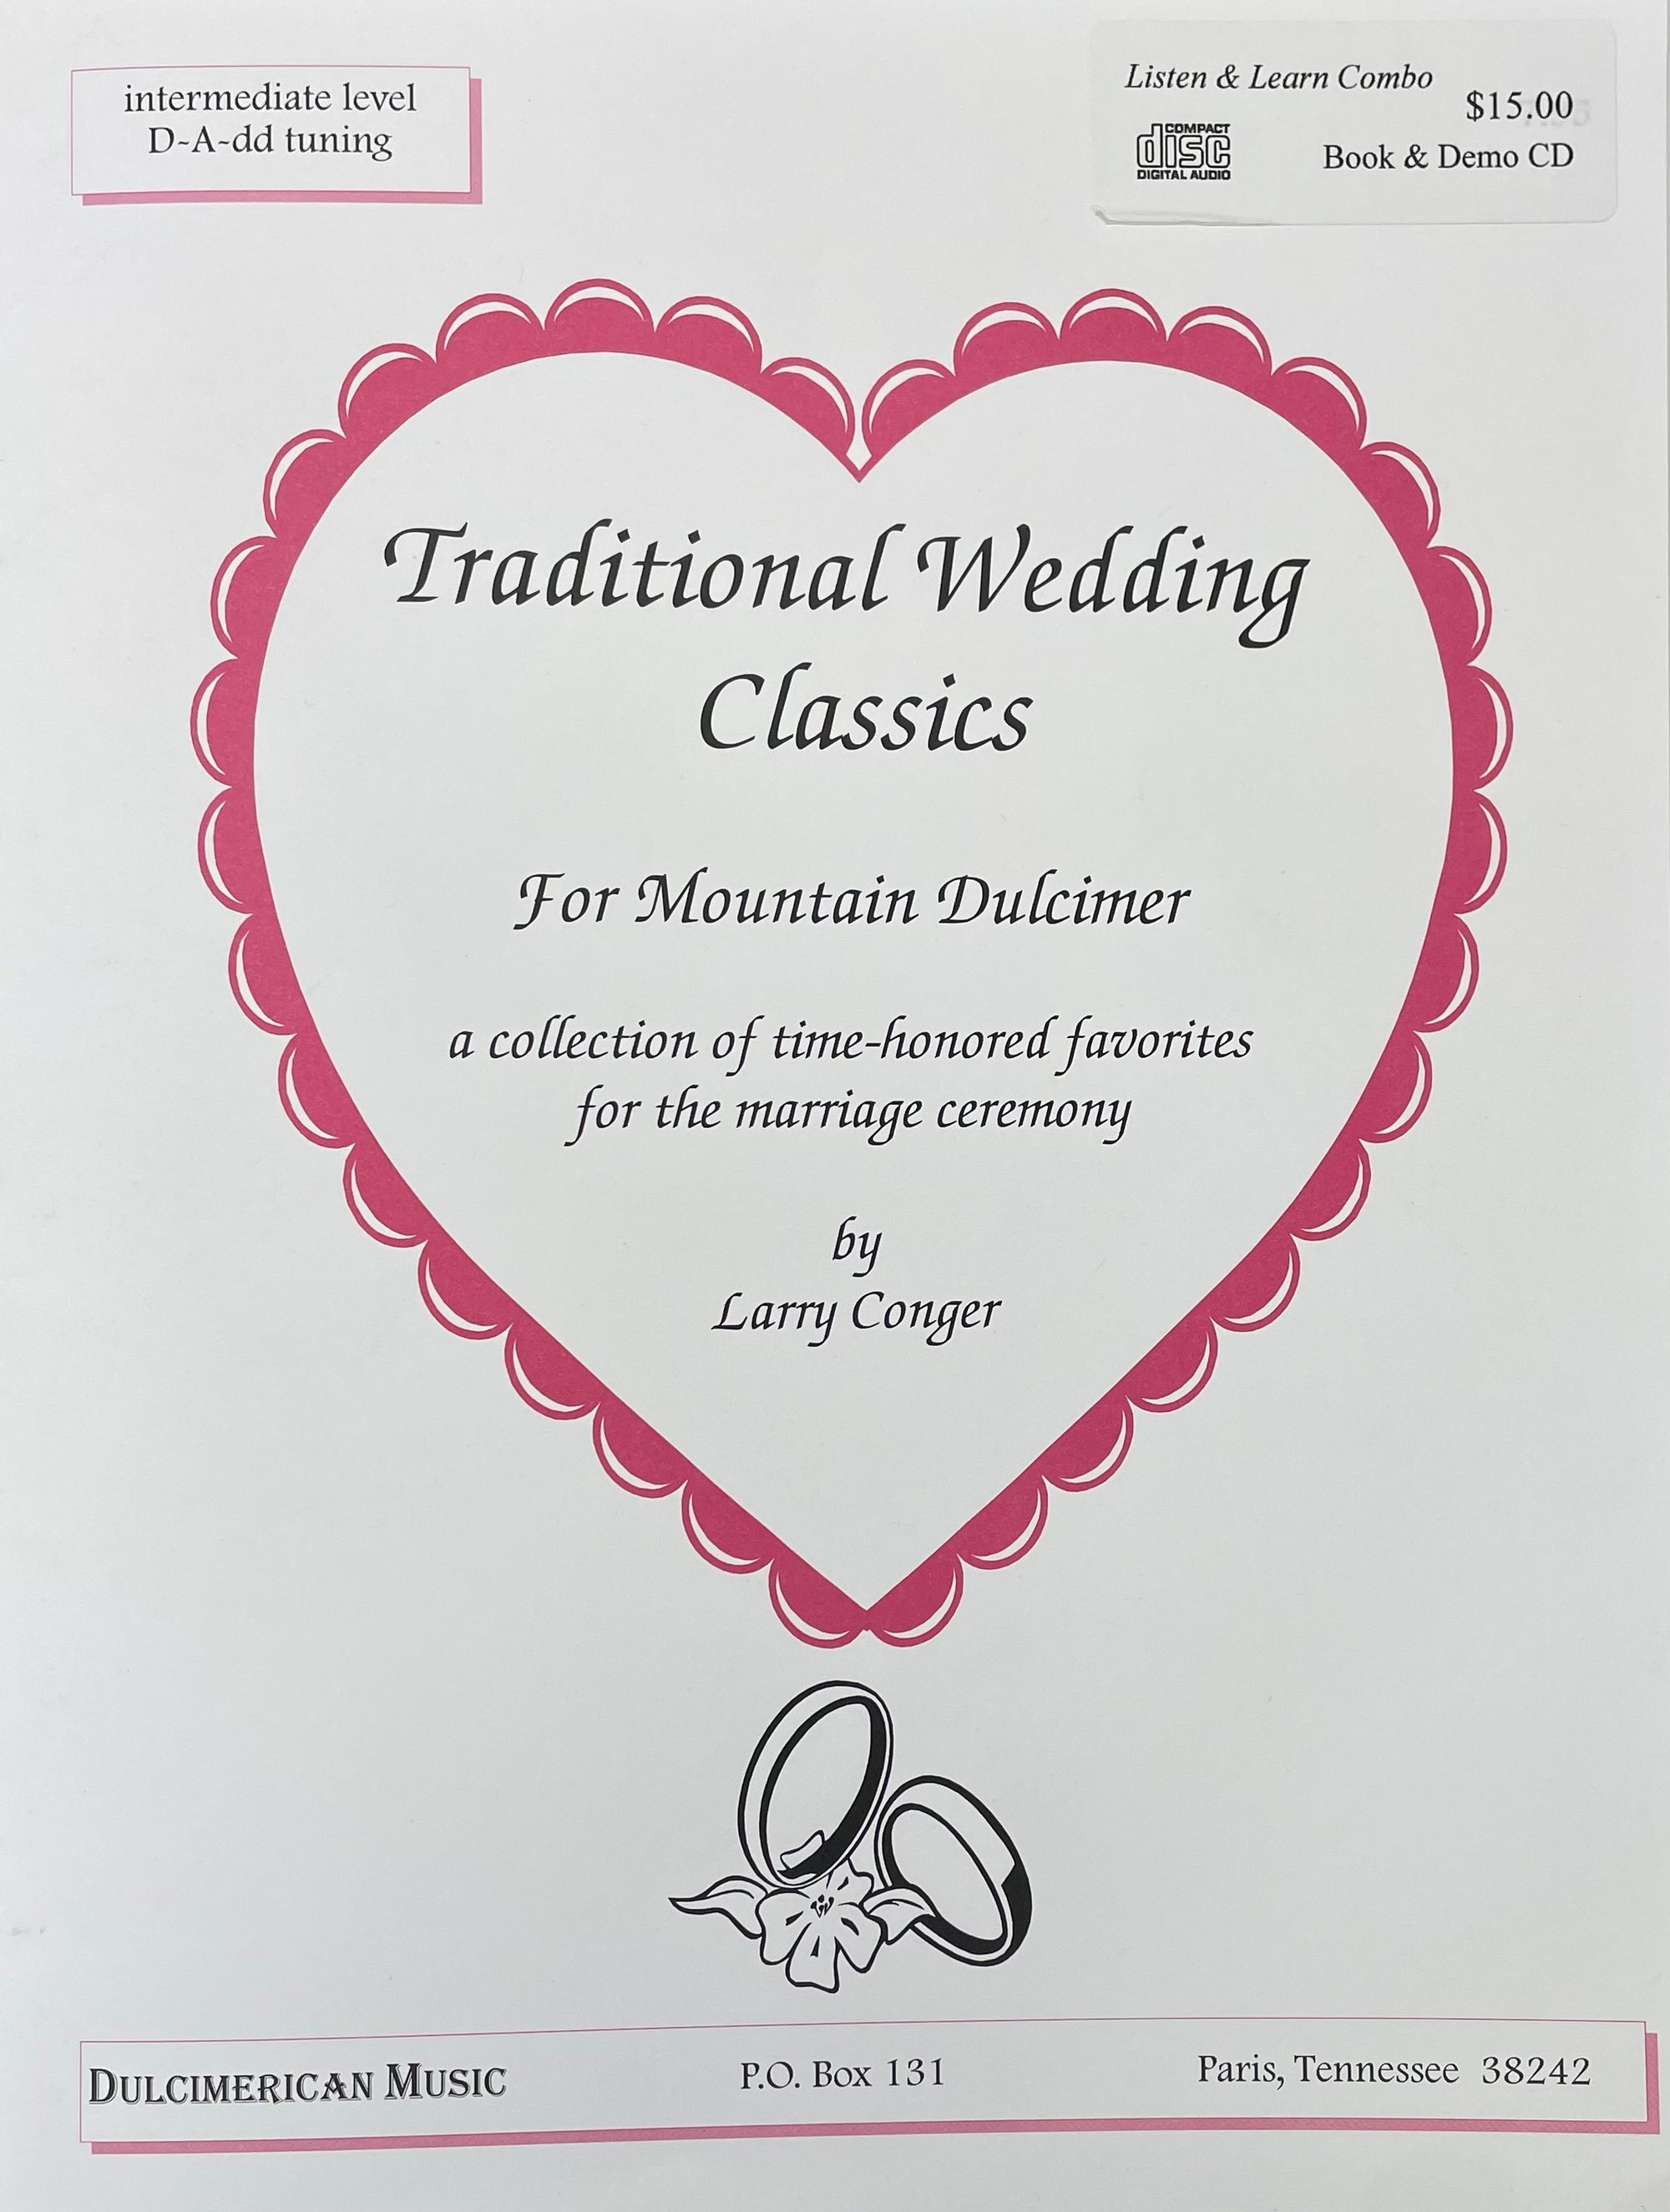 Promotional material for "Traditional Wedding Classics for Mountain Dulcimer," a music collection by Larry Conger, with a heart border and wedding rings illustration.